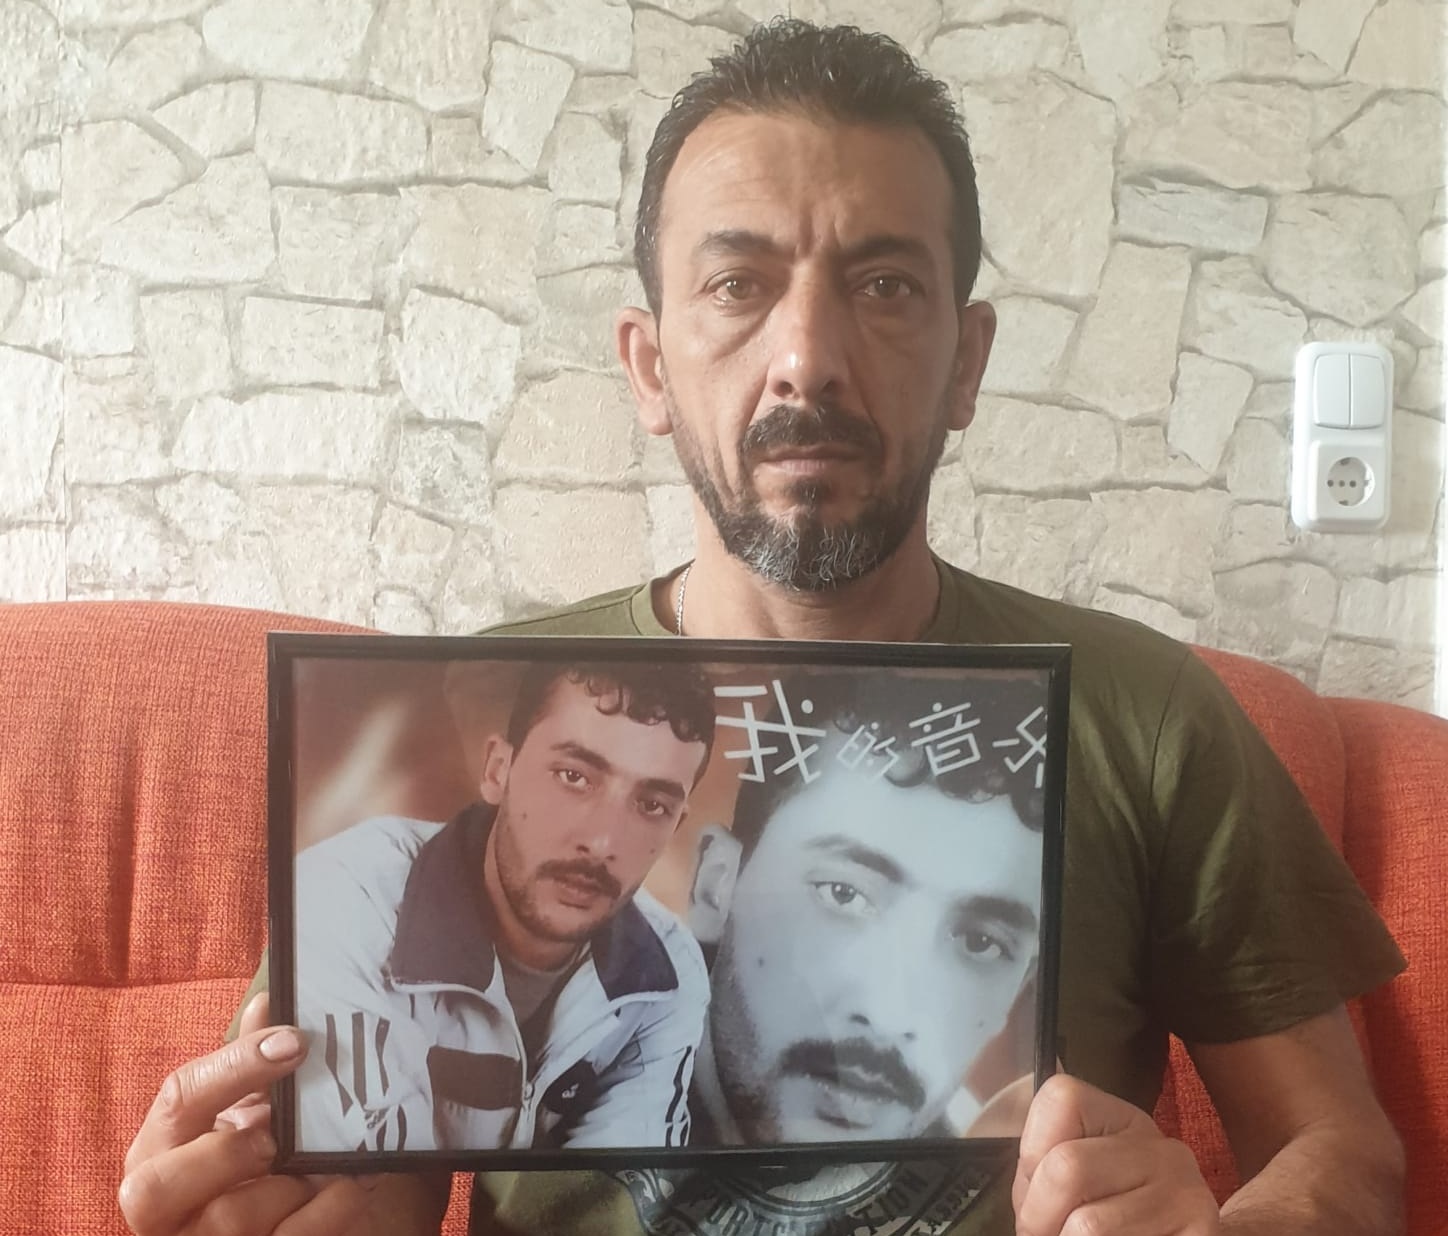 Palestinian Refugee Identifies Brother in Leaked Photos of Torture Victims in Syria